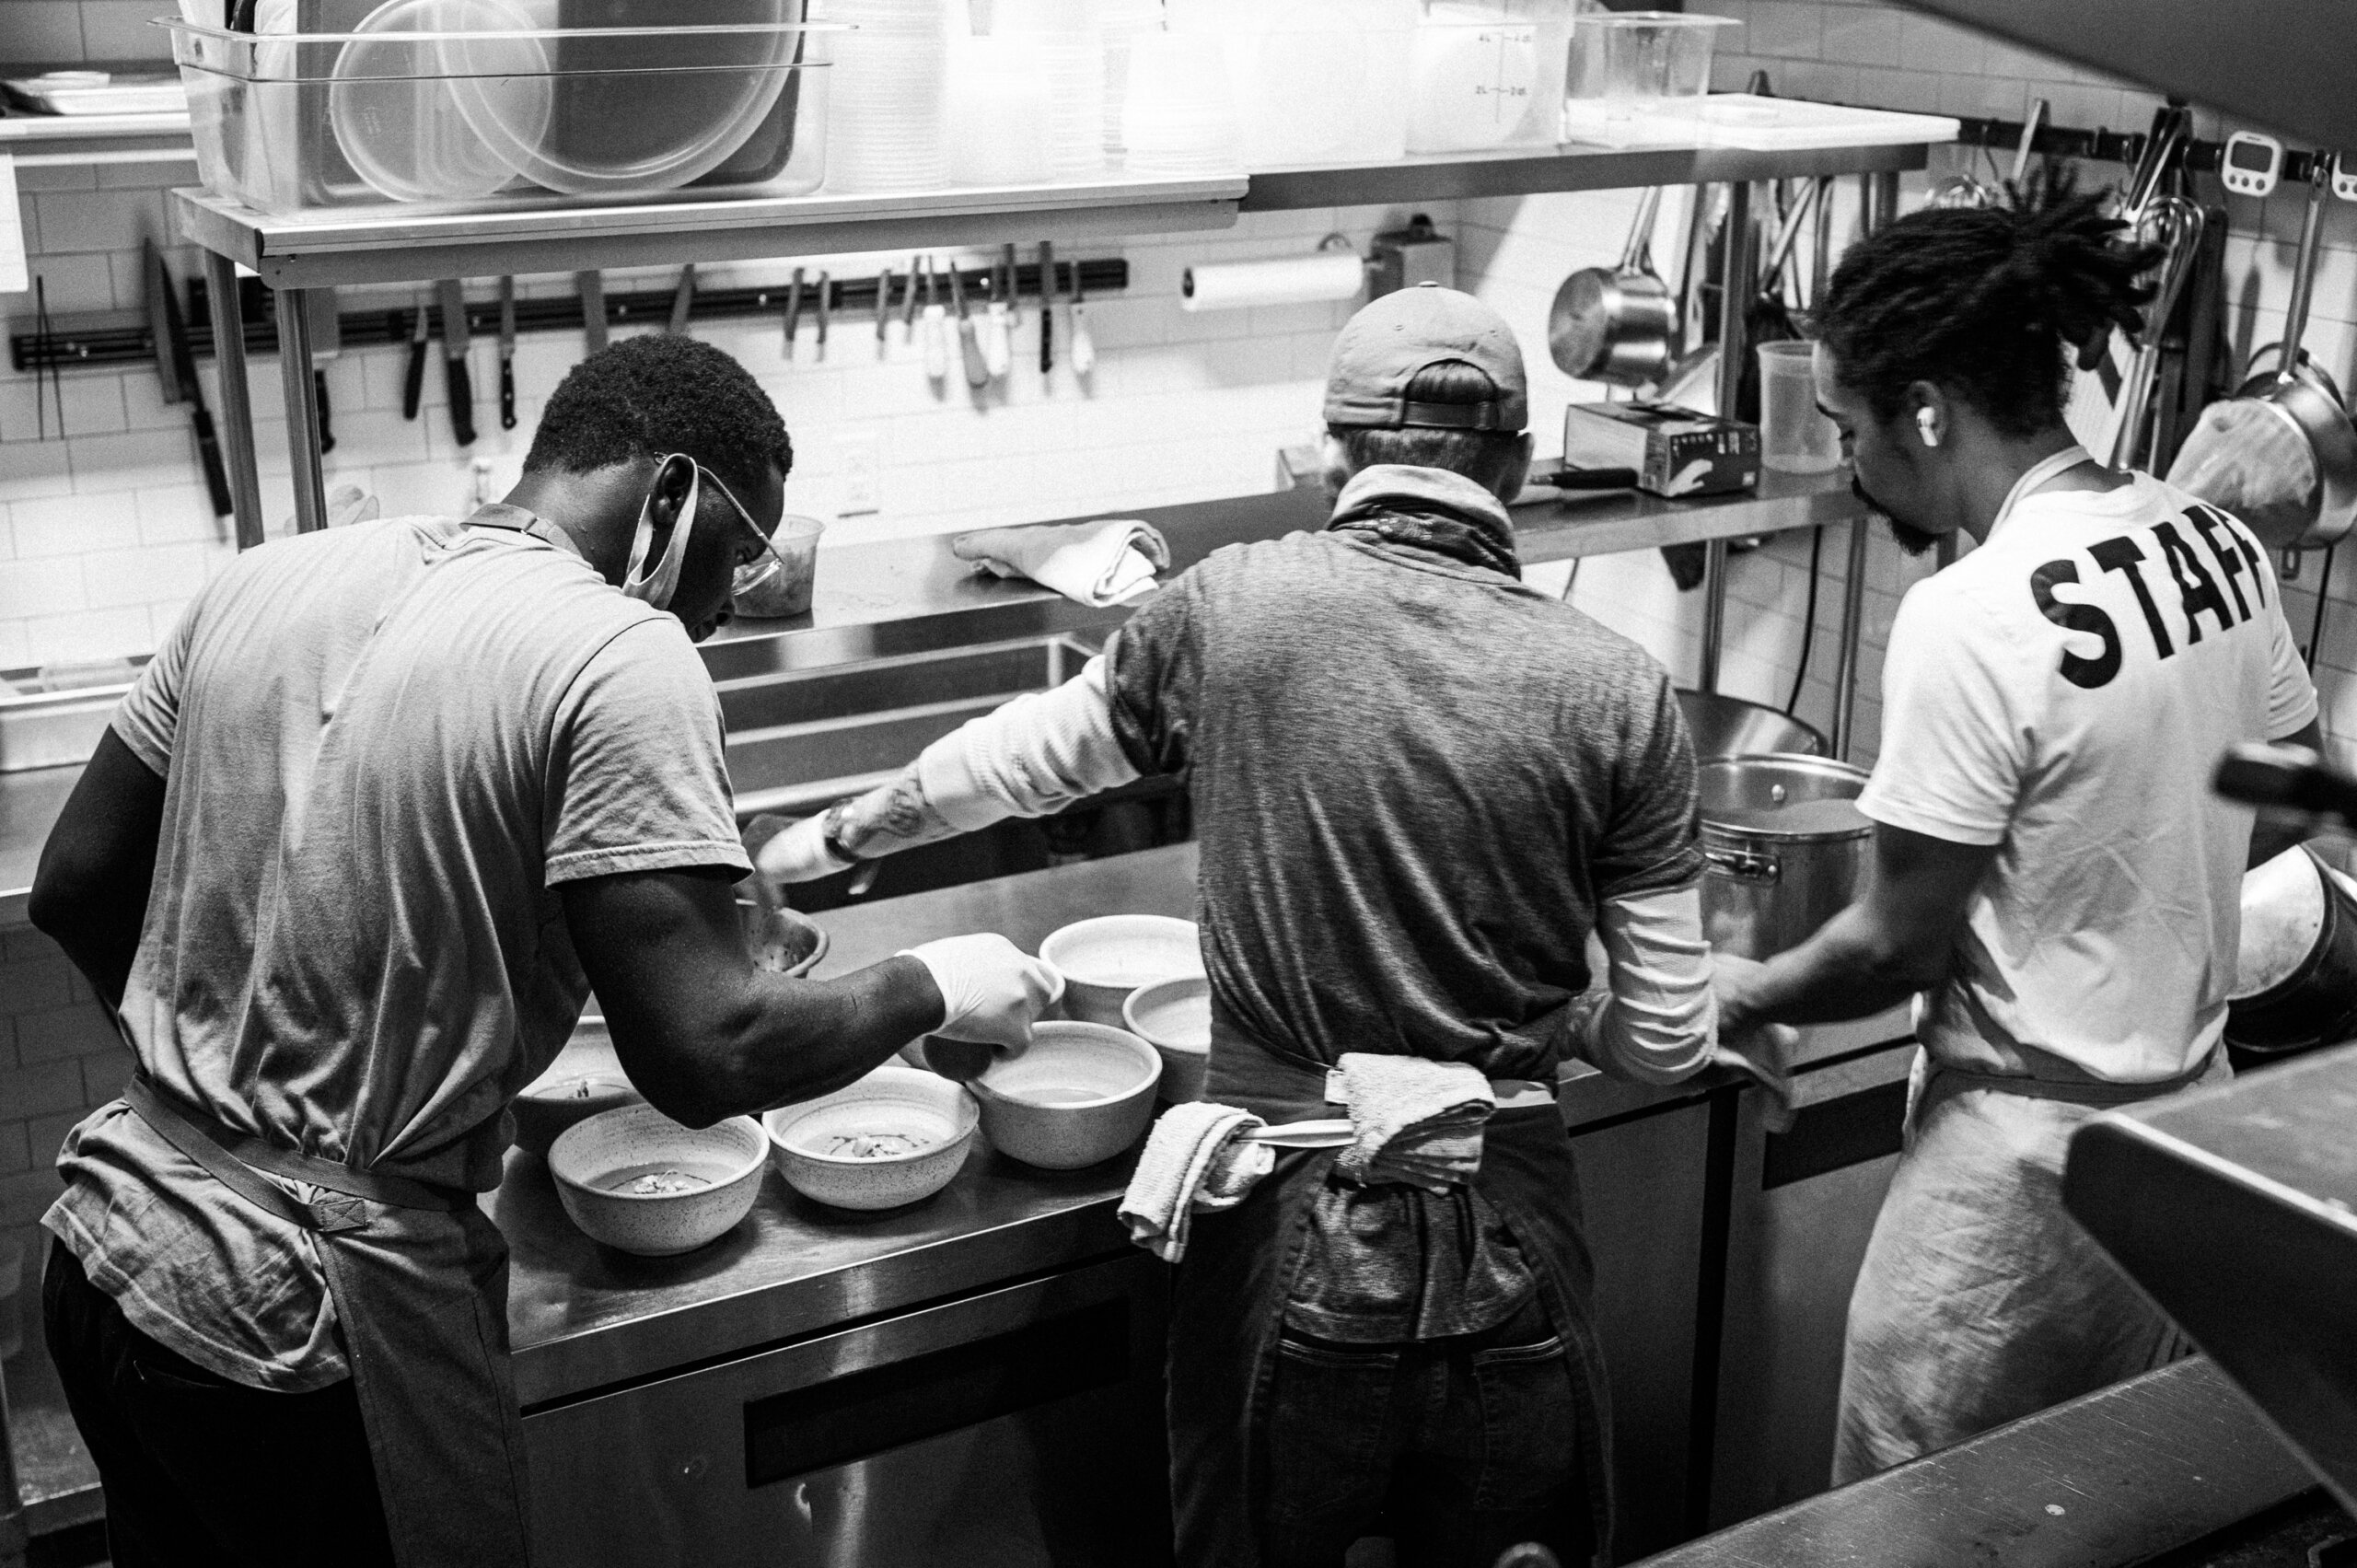 The Dakar culinary team at work inside the kitchen at Mosquito Supper Club